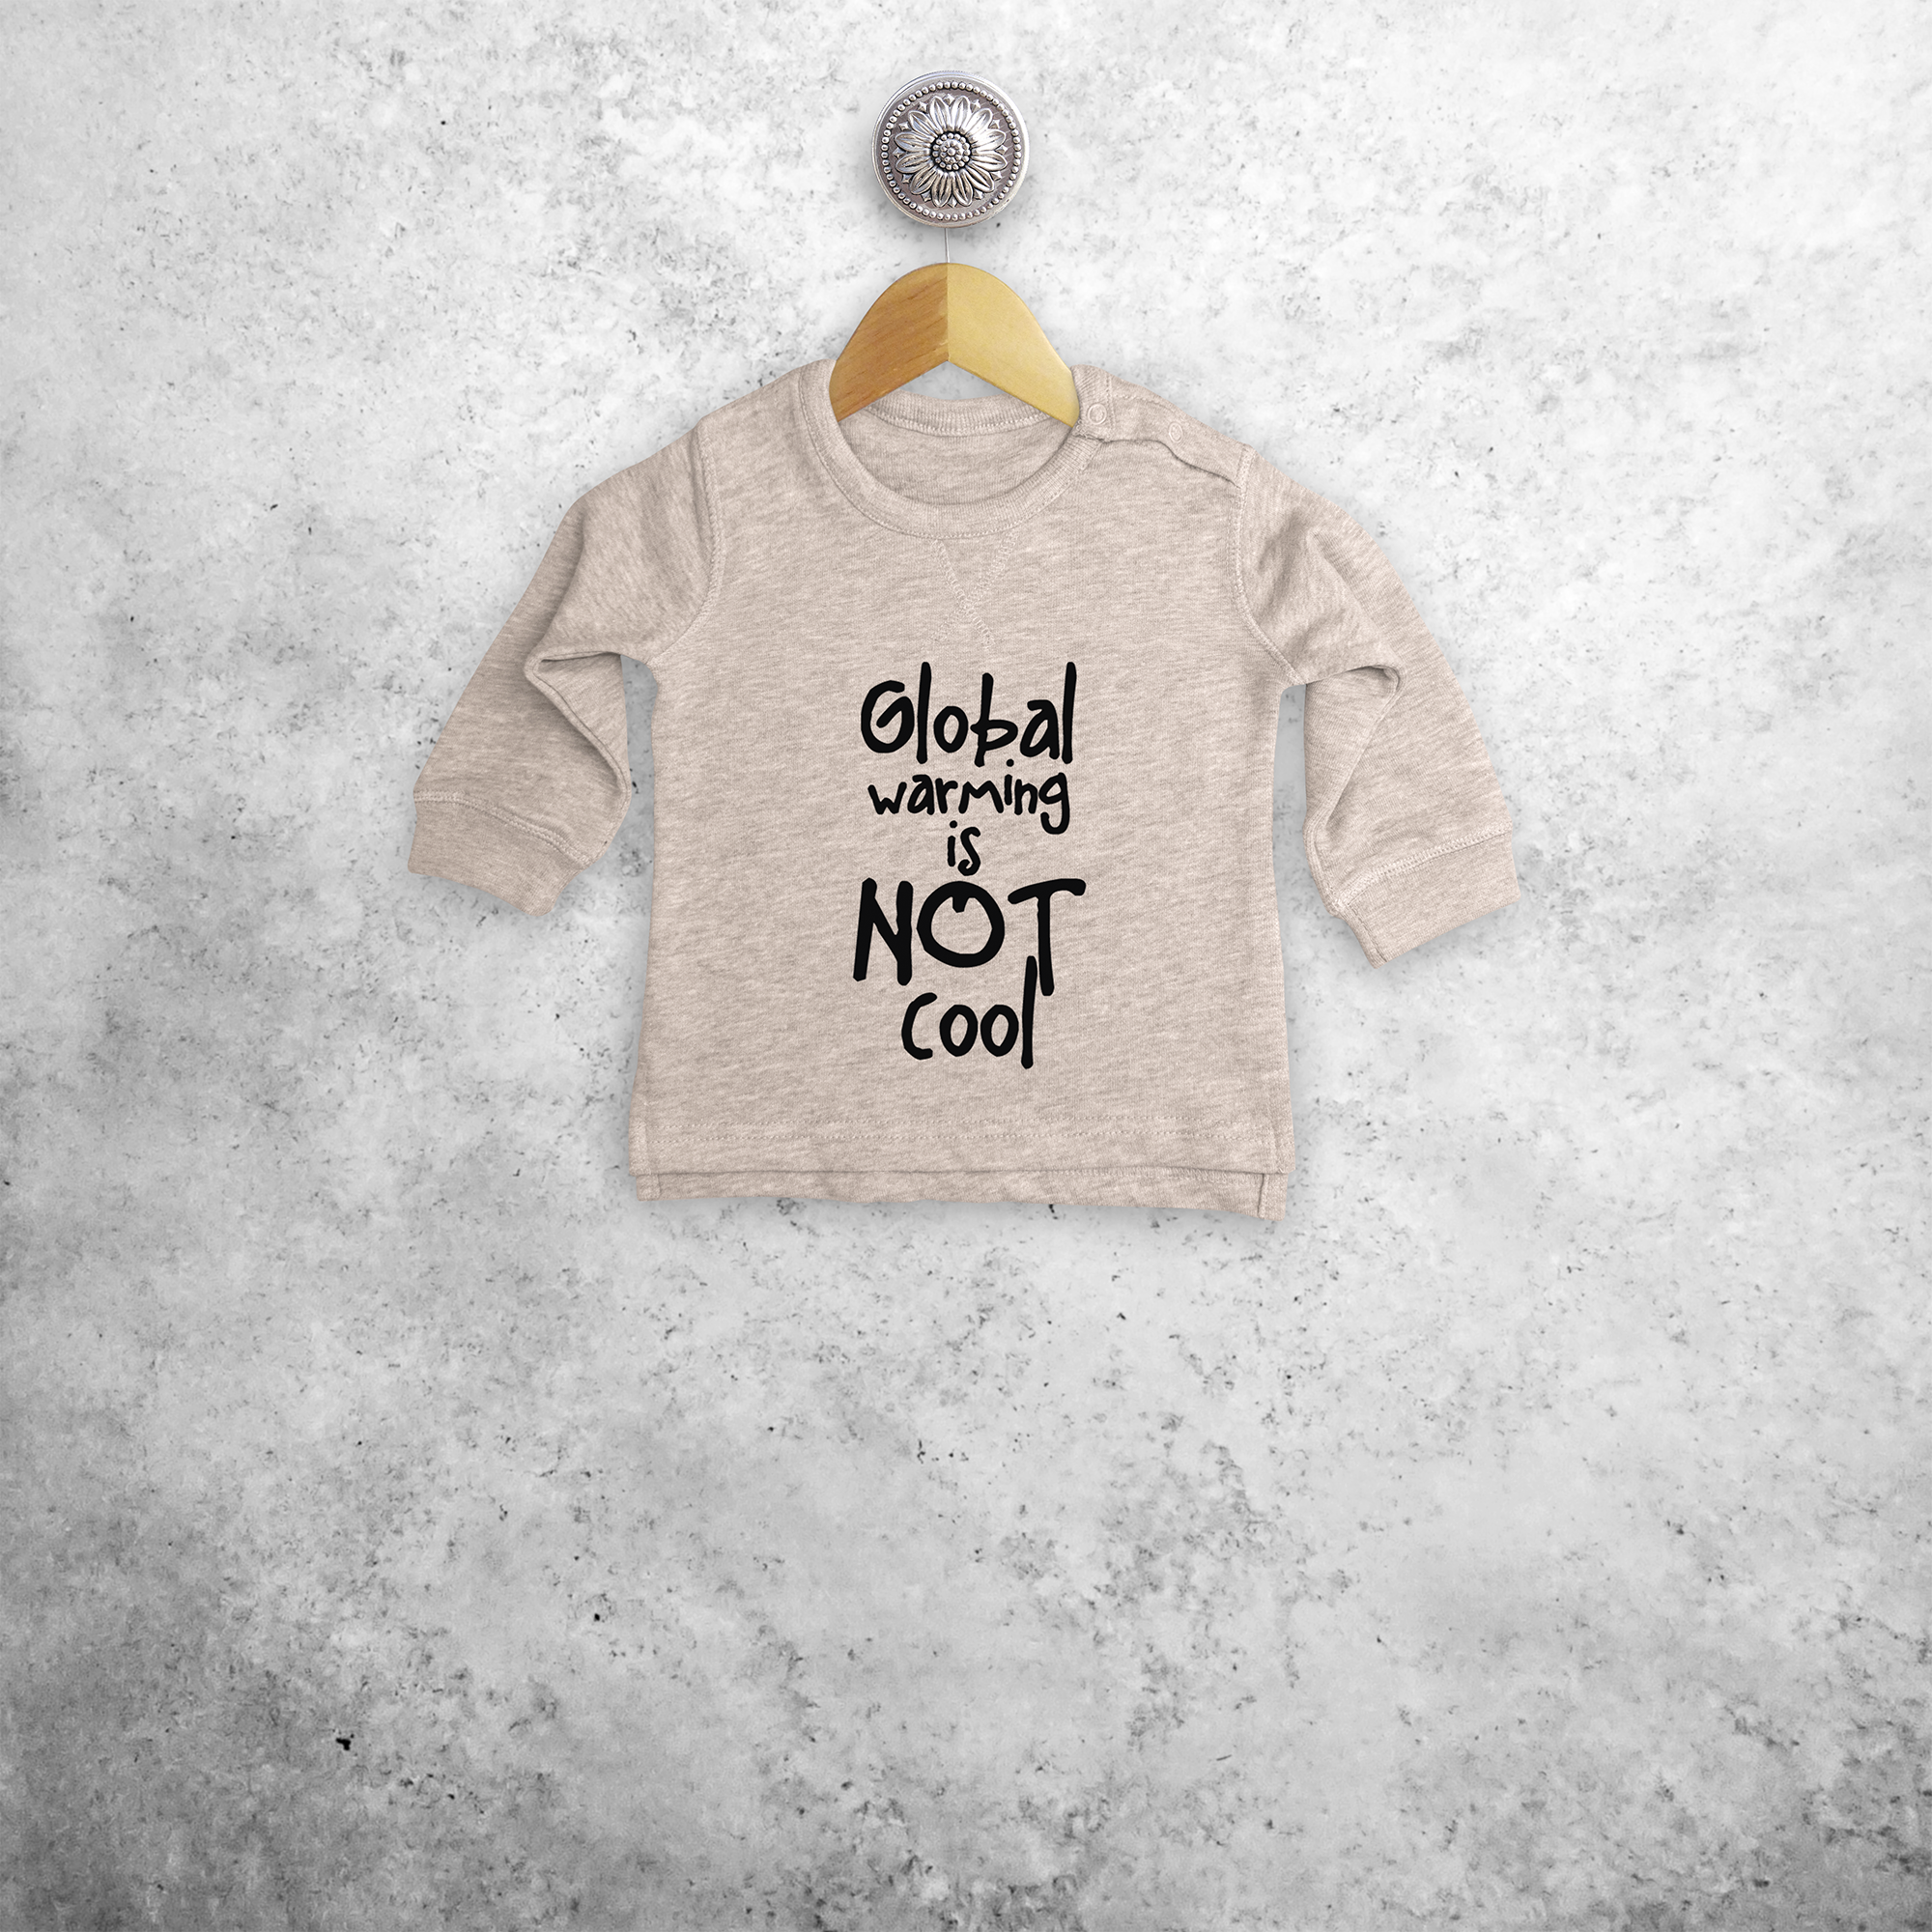 'Global warming is not cool' baby sweater